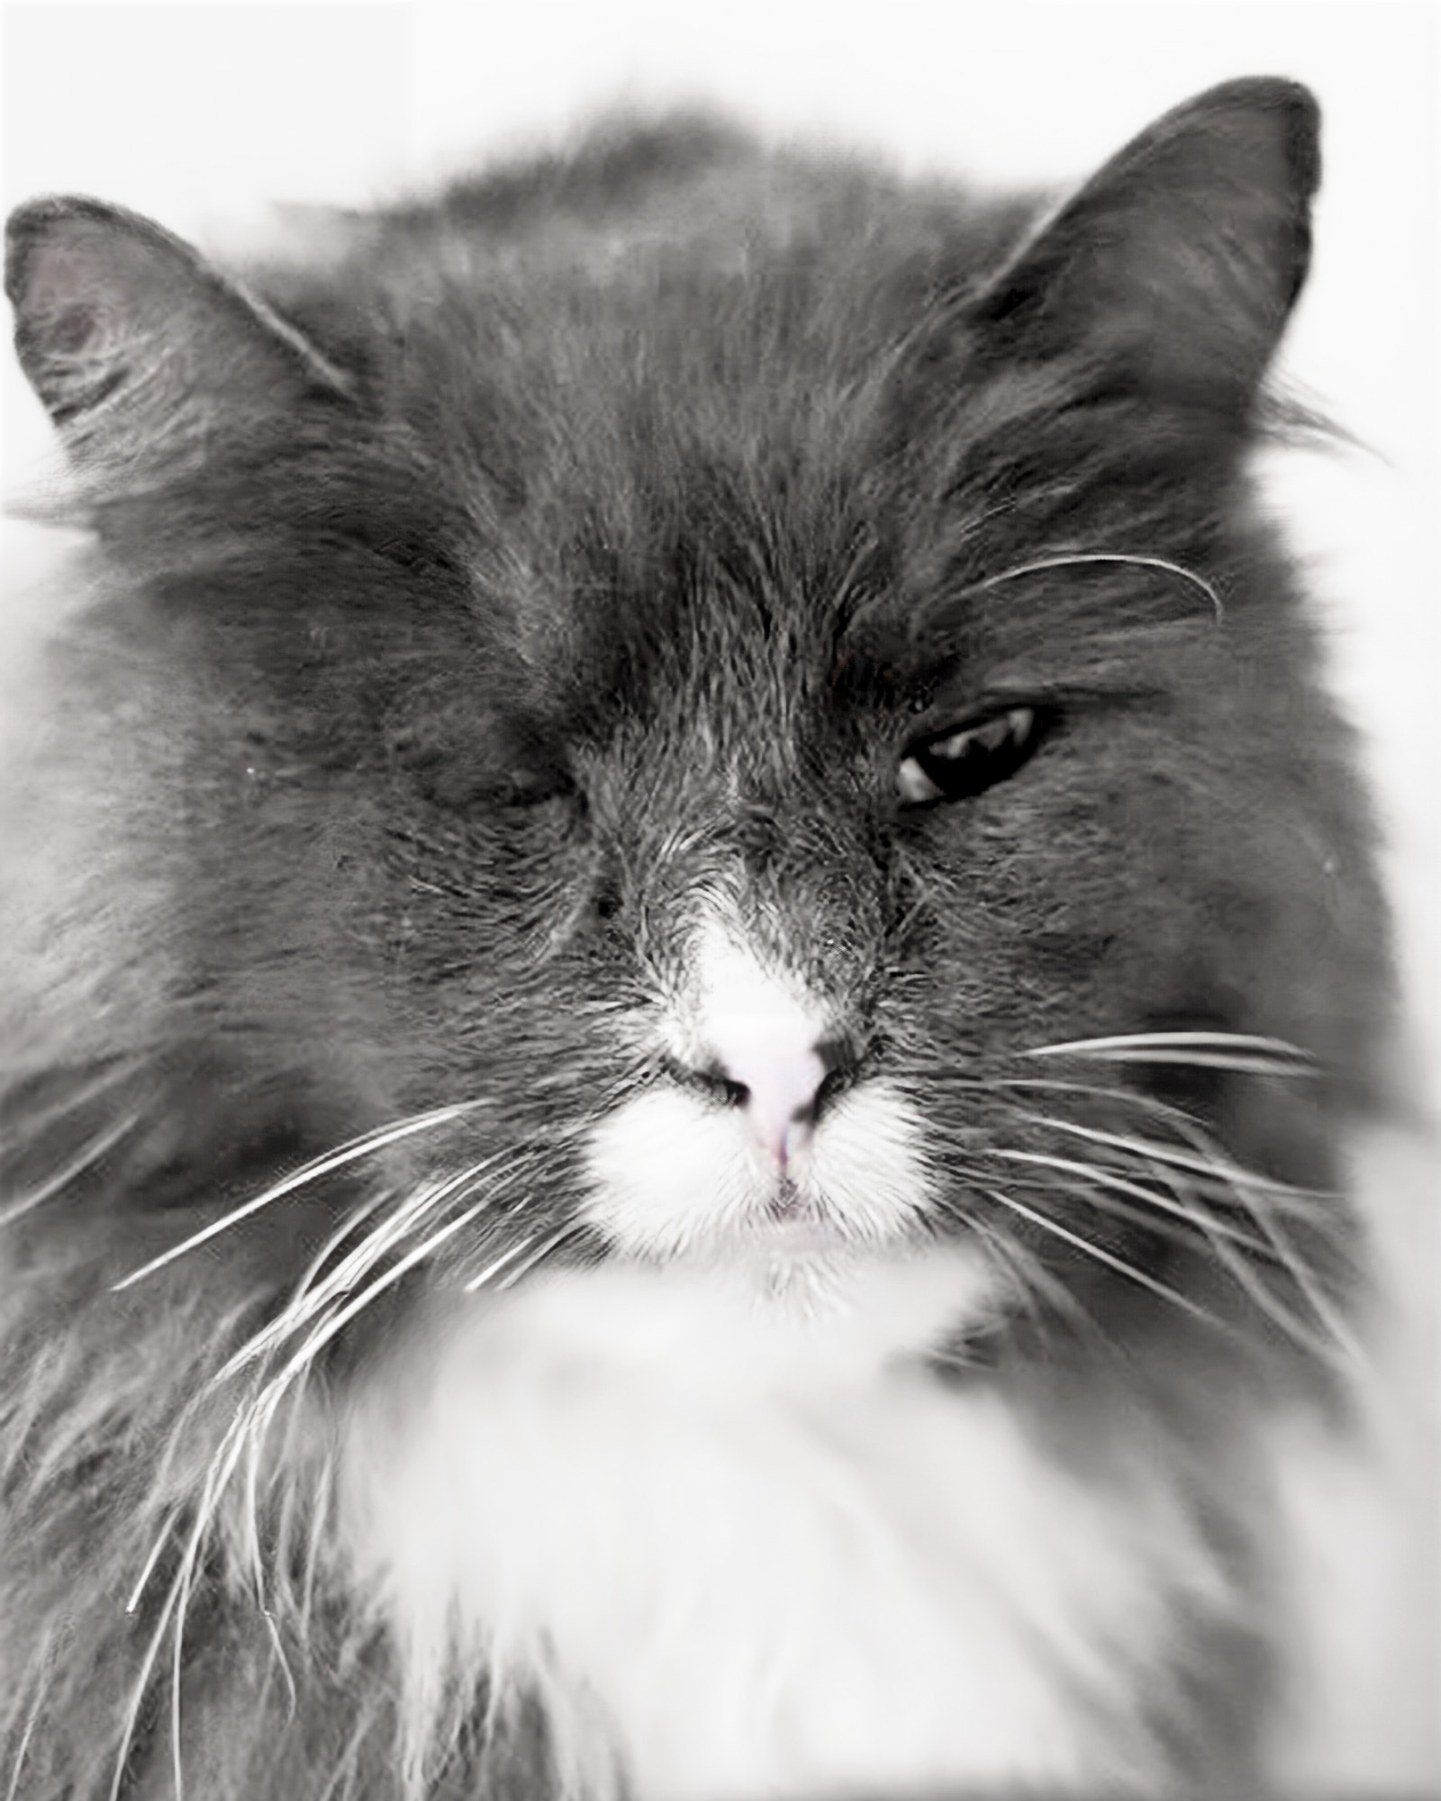 Meet Jay Jay, a majestic 10-year-old Domestic Longhair mix with a striking grey and white coat. Despite missing one eye, he navigates his world with ease. Not a fan of toys, Jay Jay loves to lounge by the window, watching life go by. If you're seekin